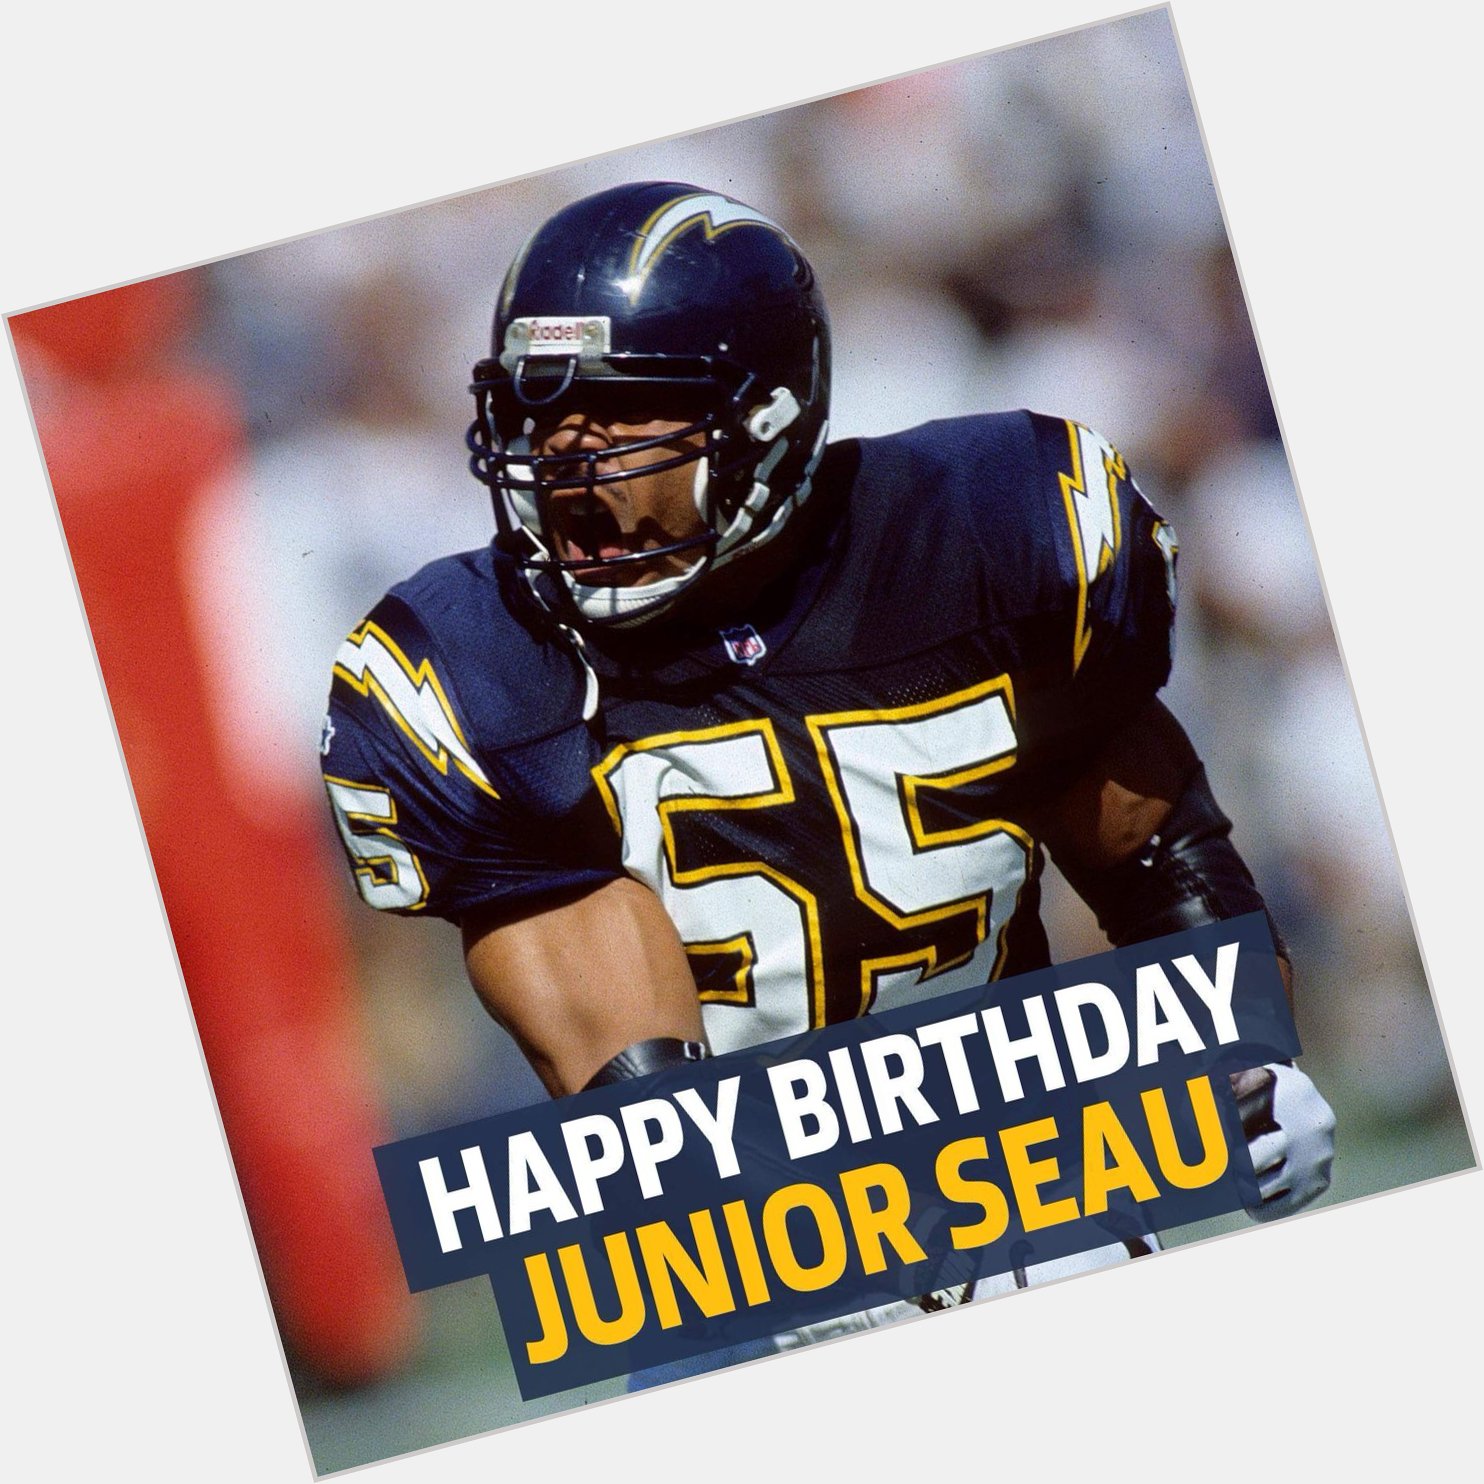 Happy Birthday to a once great football player and even better man, Junior Seau, gone but not forgotten. 